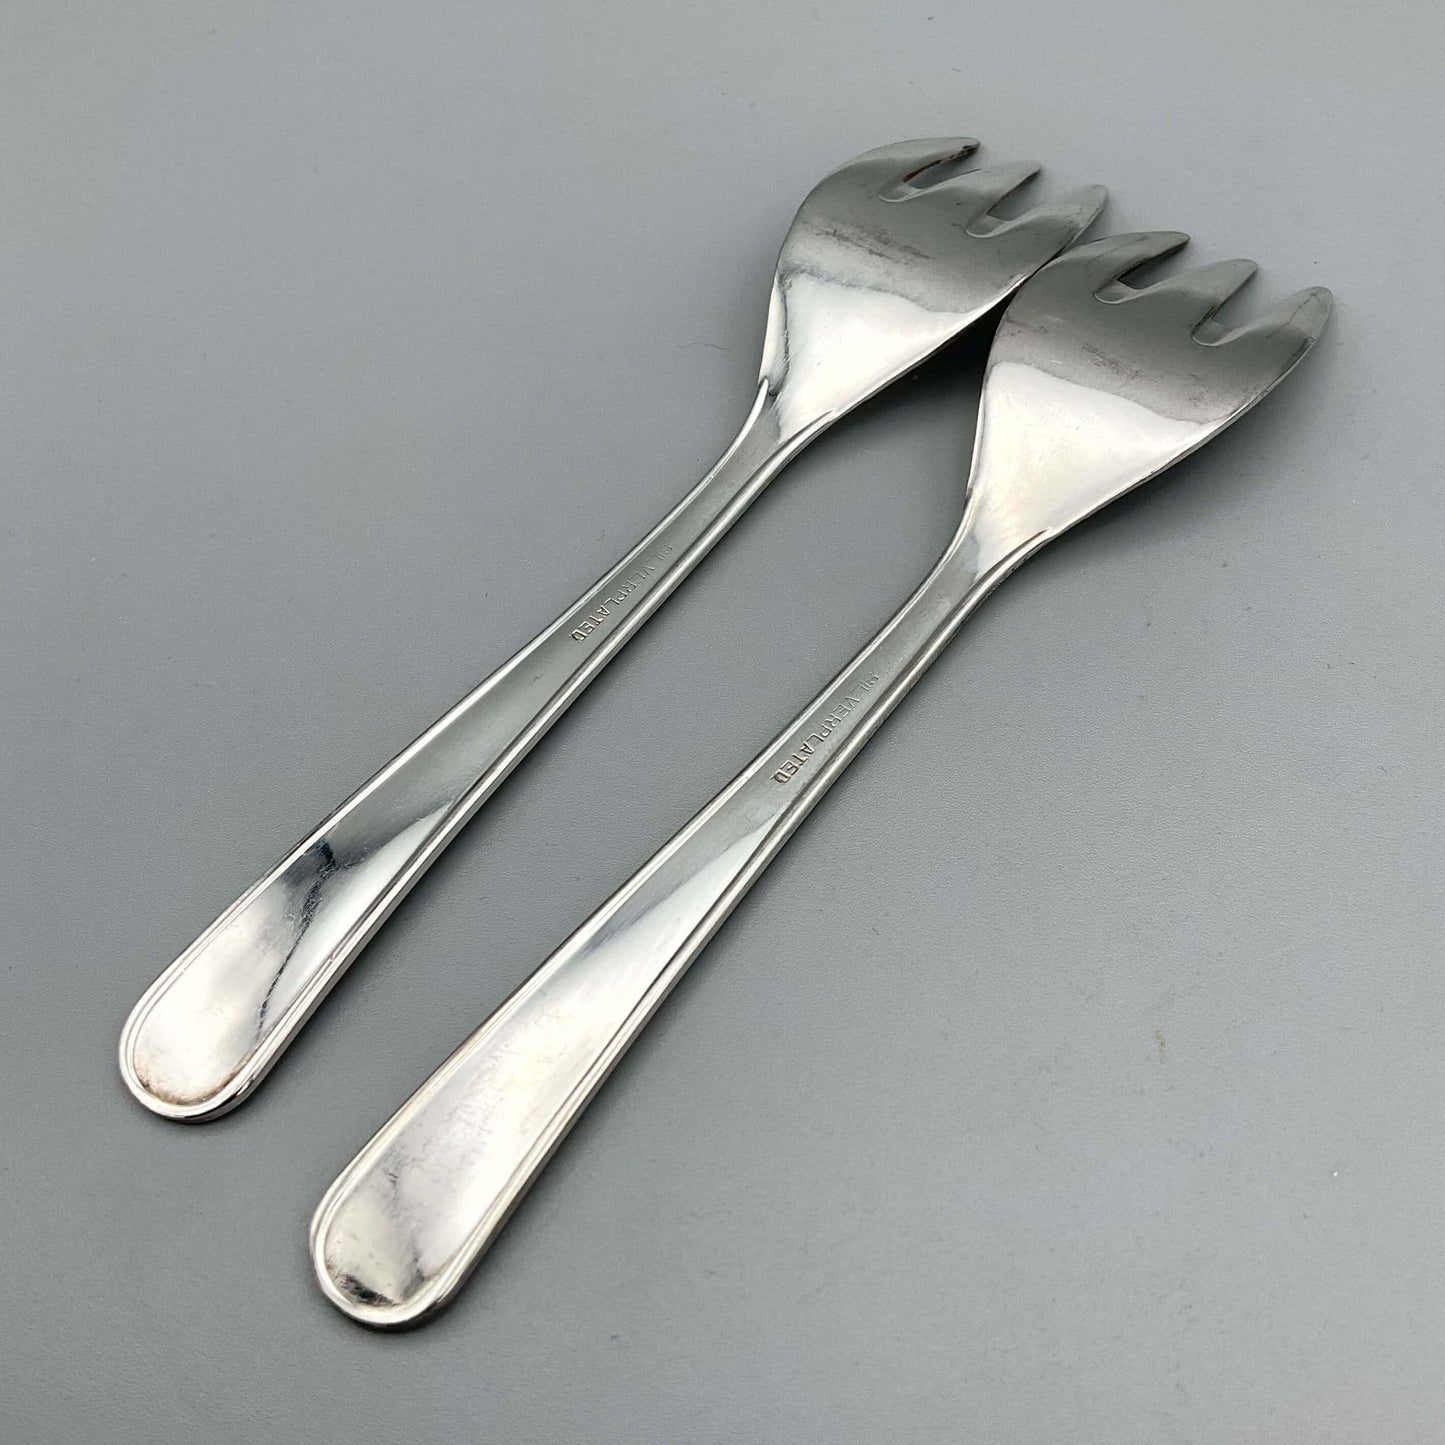 Pair of Vintage Silver Plated Forks